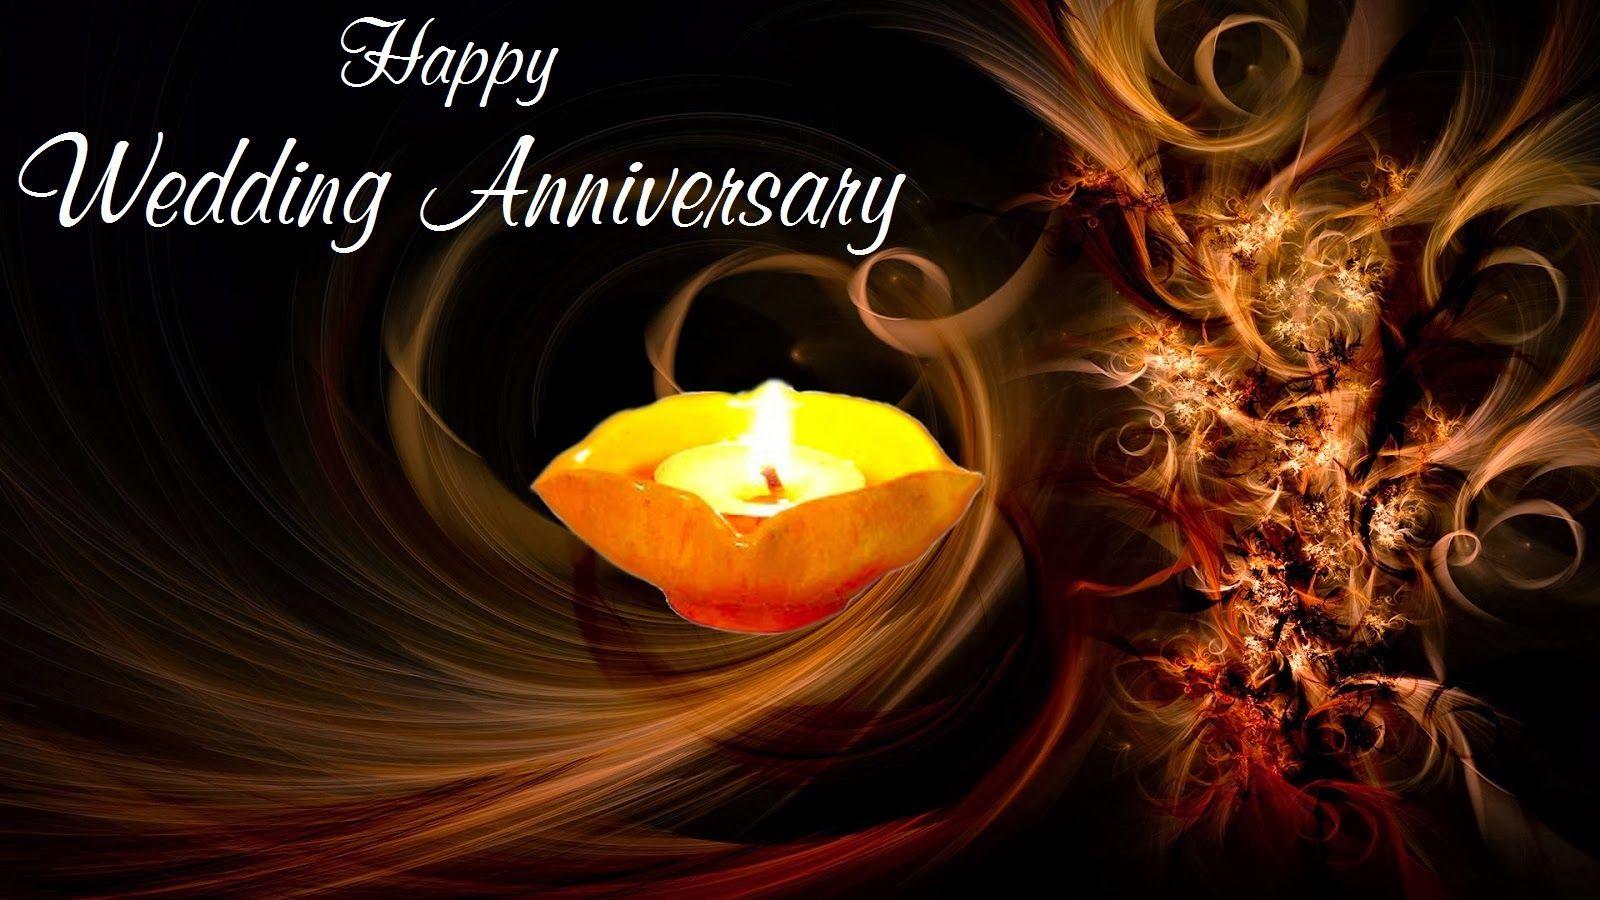 Happy 3D Marriage Anniversary Messages Wallpaper HD Inspiring